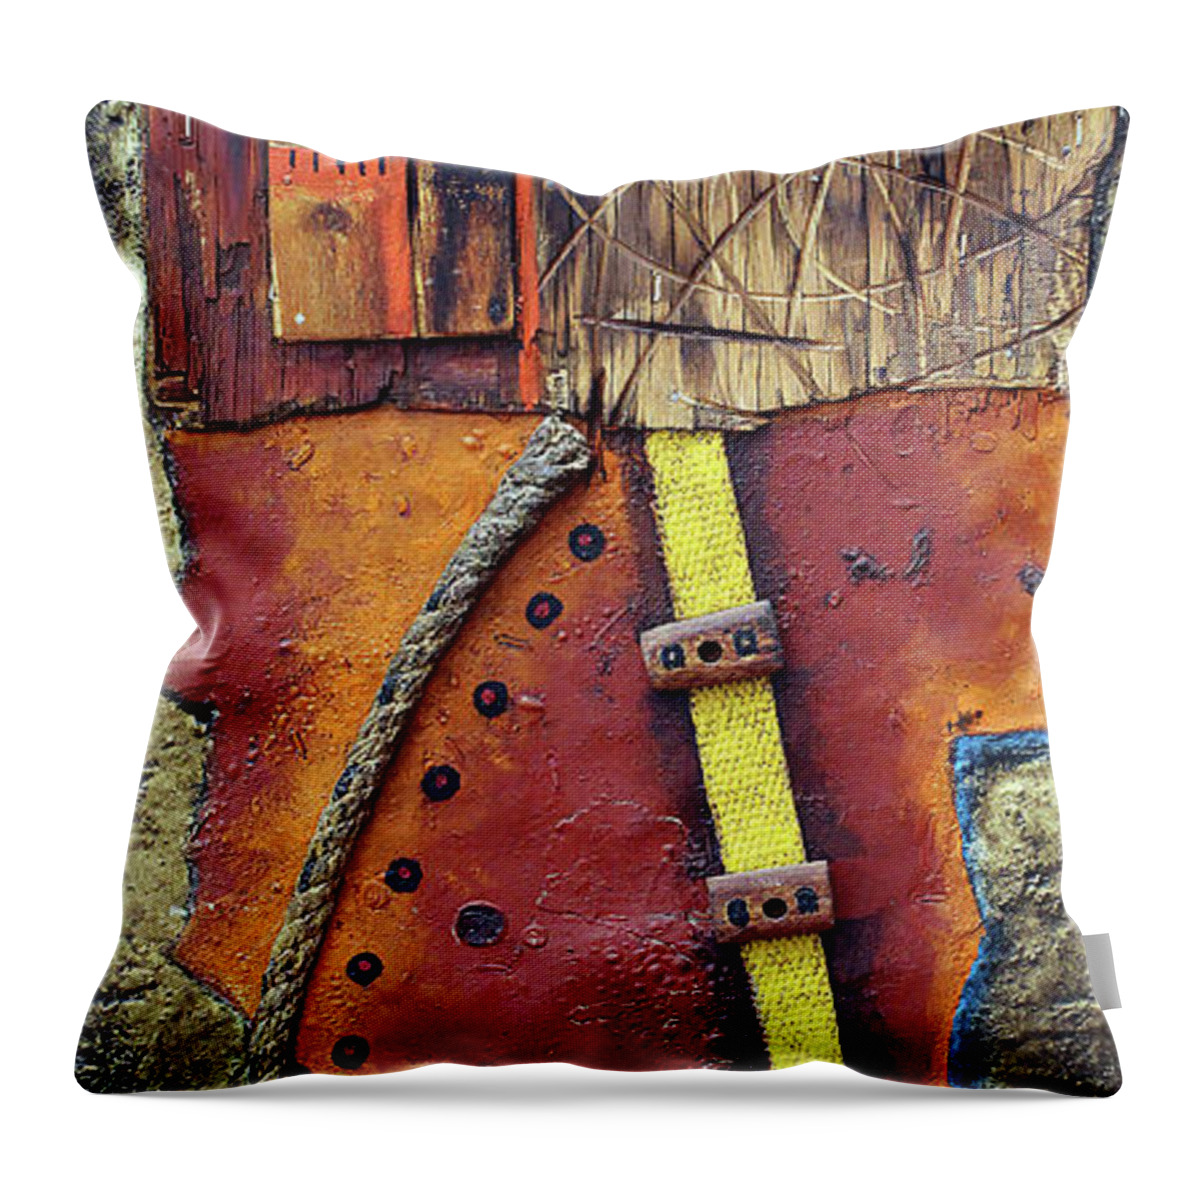 African Art Throw Pillow featuring the painting Mission Control by Michael Nene